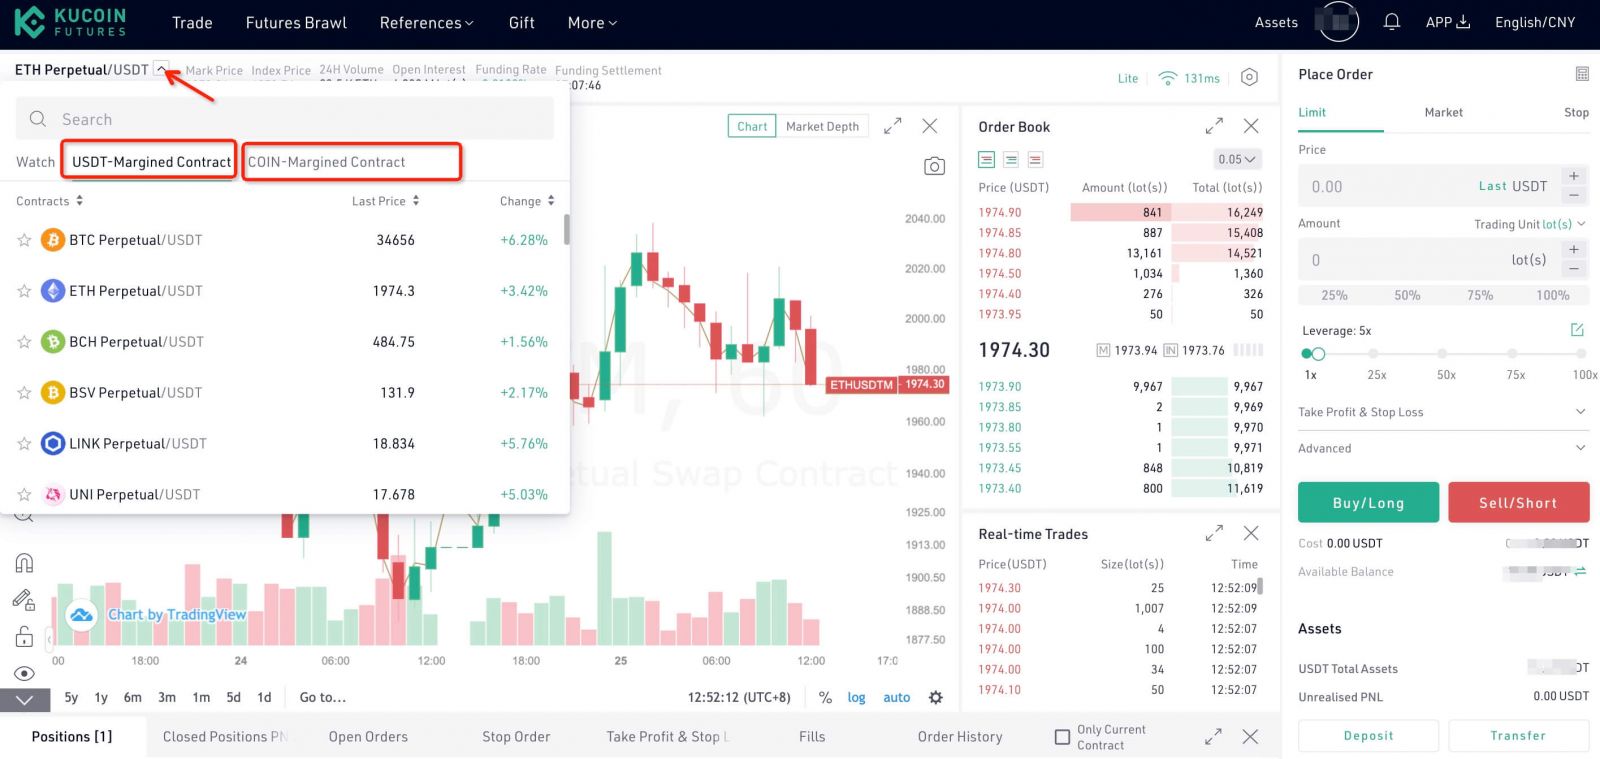 How to Start KuCoin Trading in 2021: A Step-By-Step Guide for Beginners